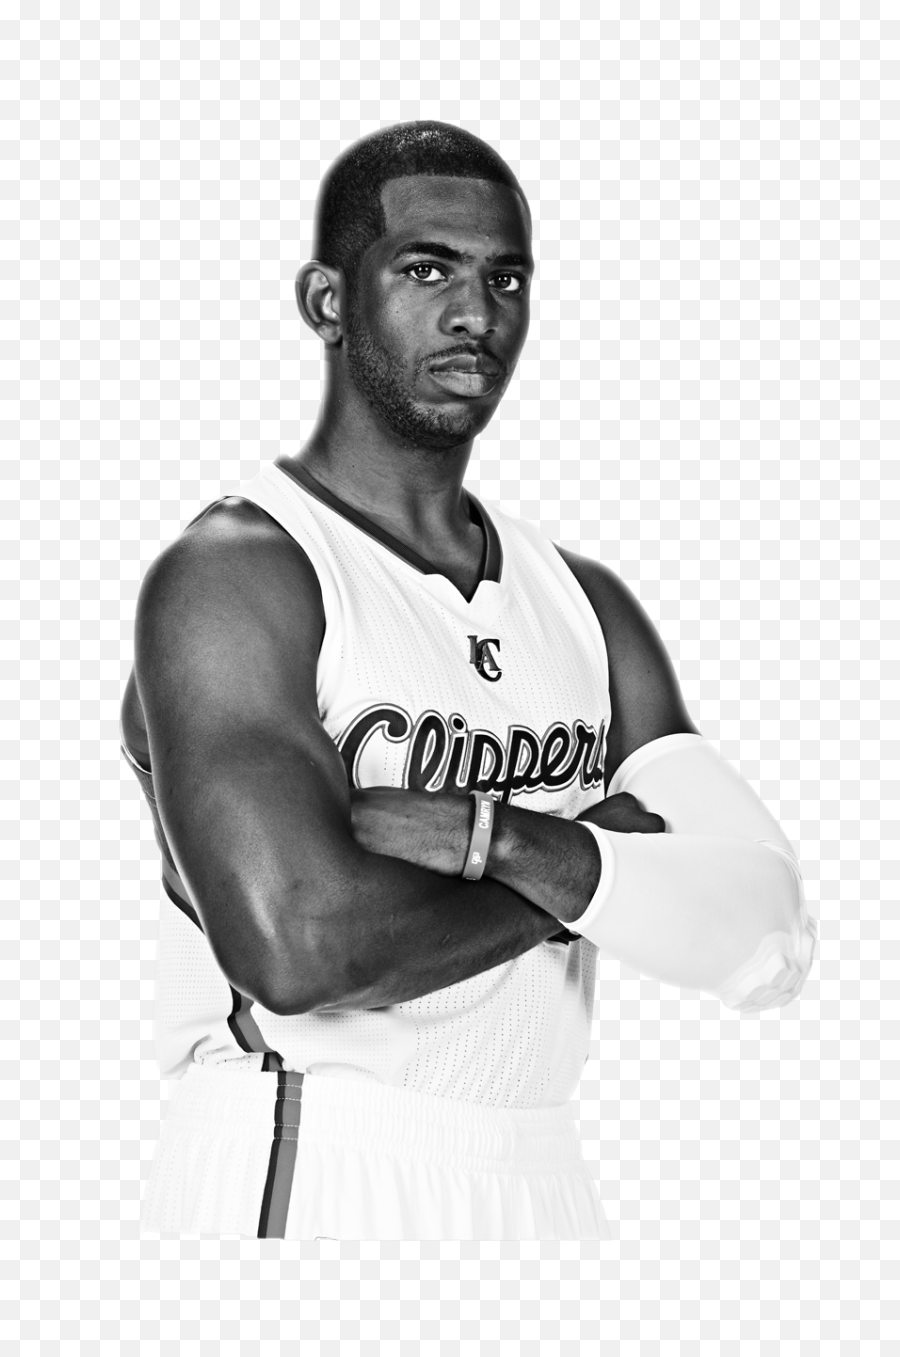 Text Paul To 69622 Send Chris - Chris Paul Black And White Png,Chris Paul Png